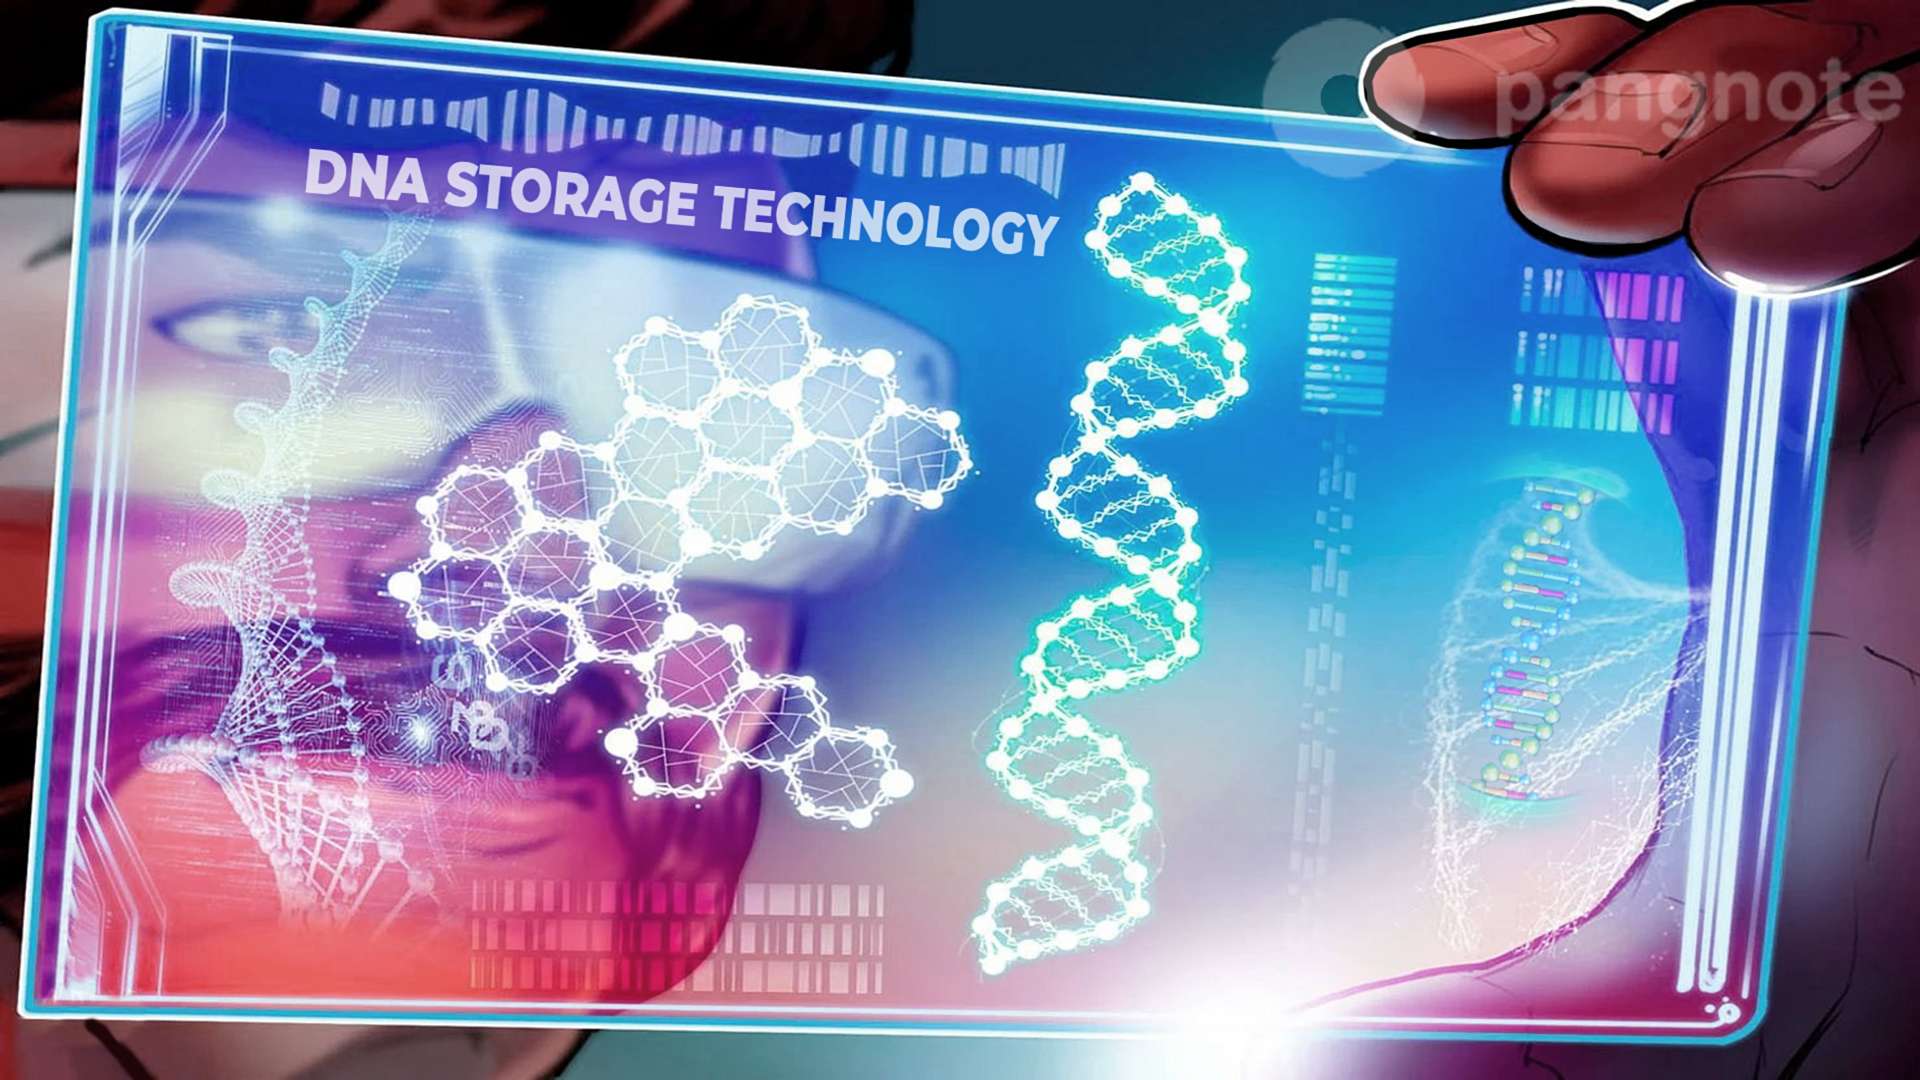  DNA storage technology: the future or failure projects?